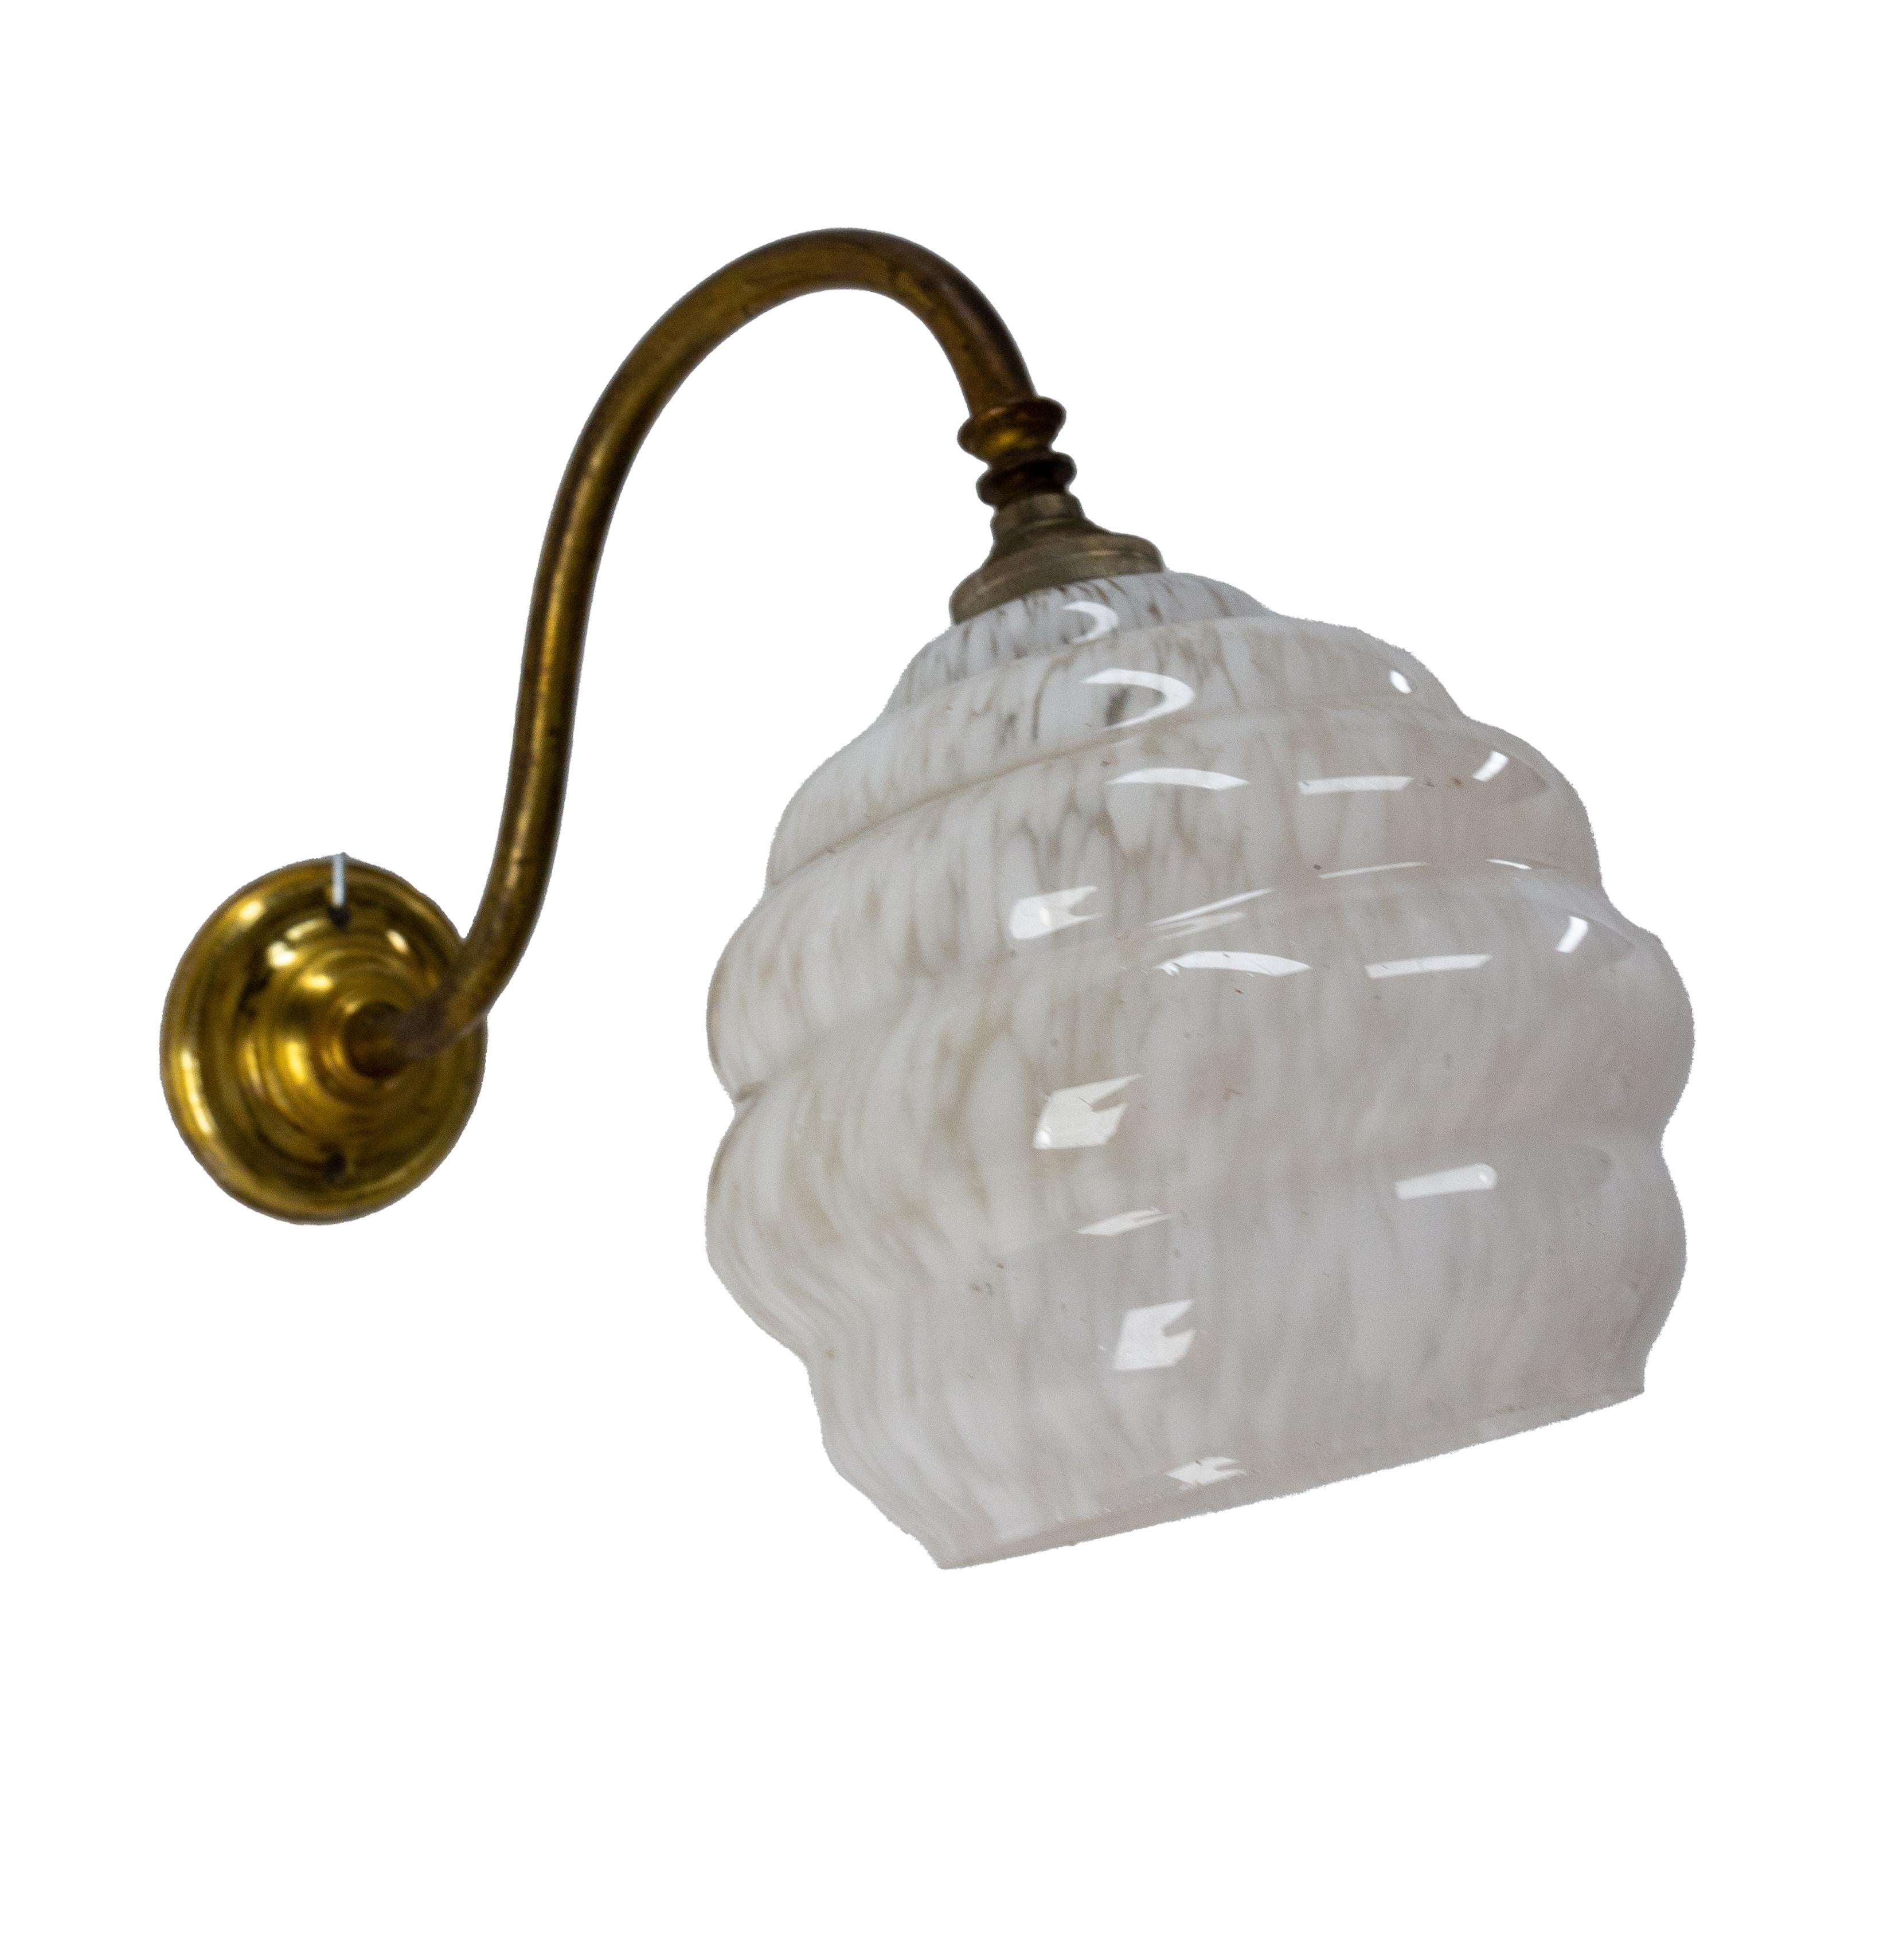 Early 20th century french wall light from the manufacture of Clichy 